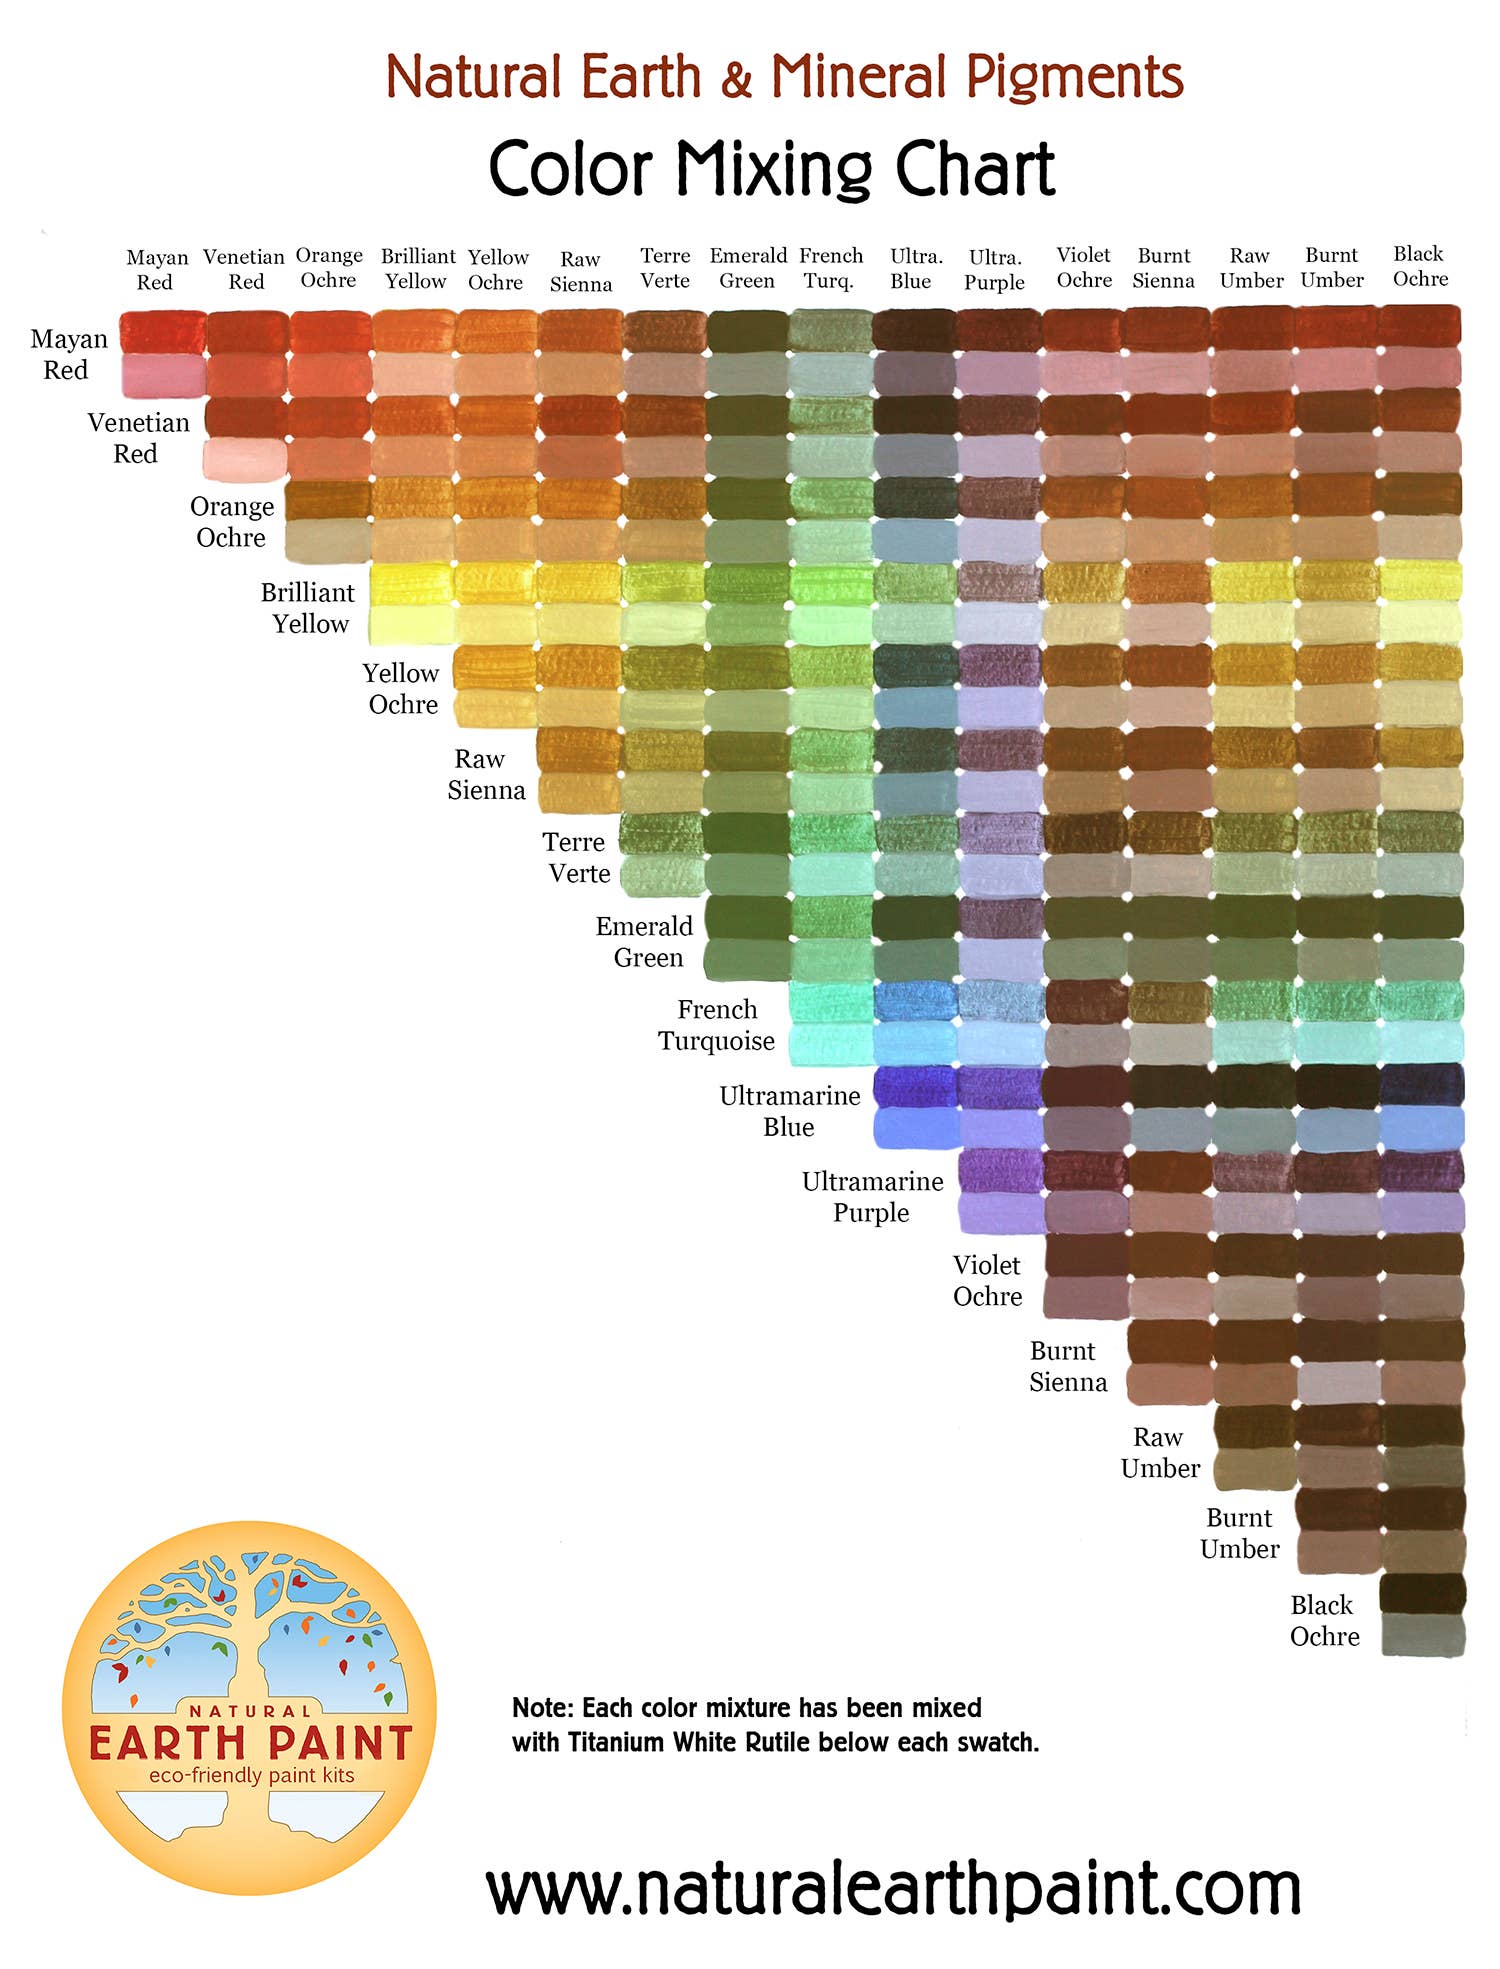 Natural Earth Paint - Color Mixing Chart